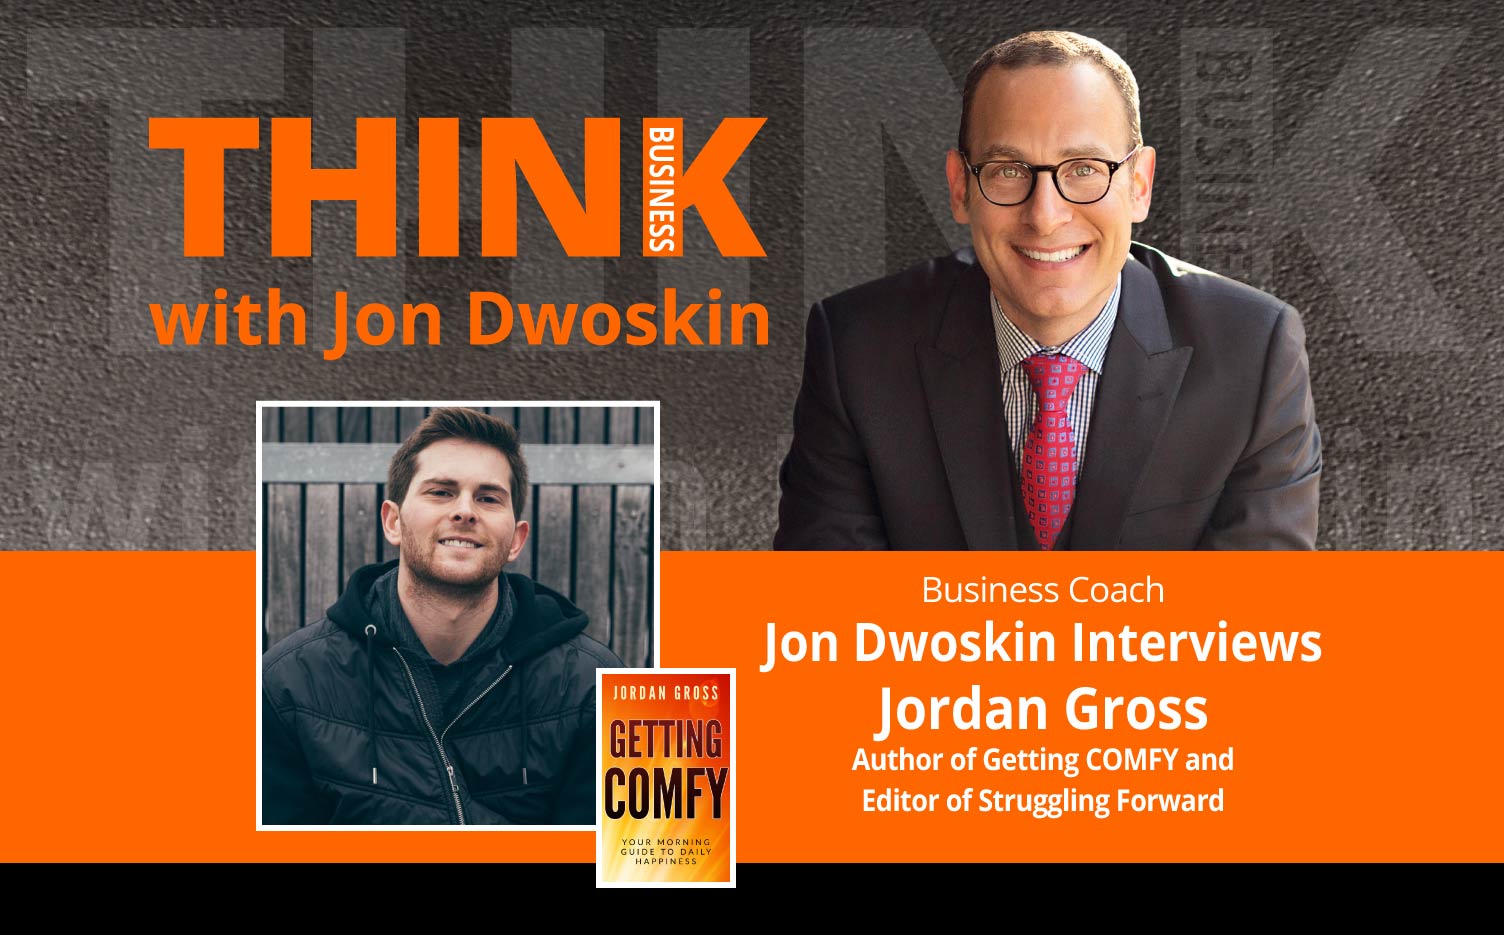 THINK Business Podcast: Jon Dwoskin Interviews Jordan Gross, Author of Getting COMFY and Editor of Struggling Forward